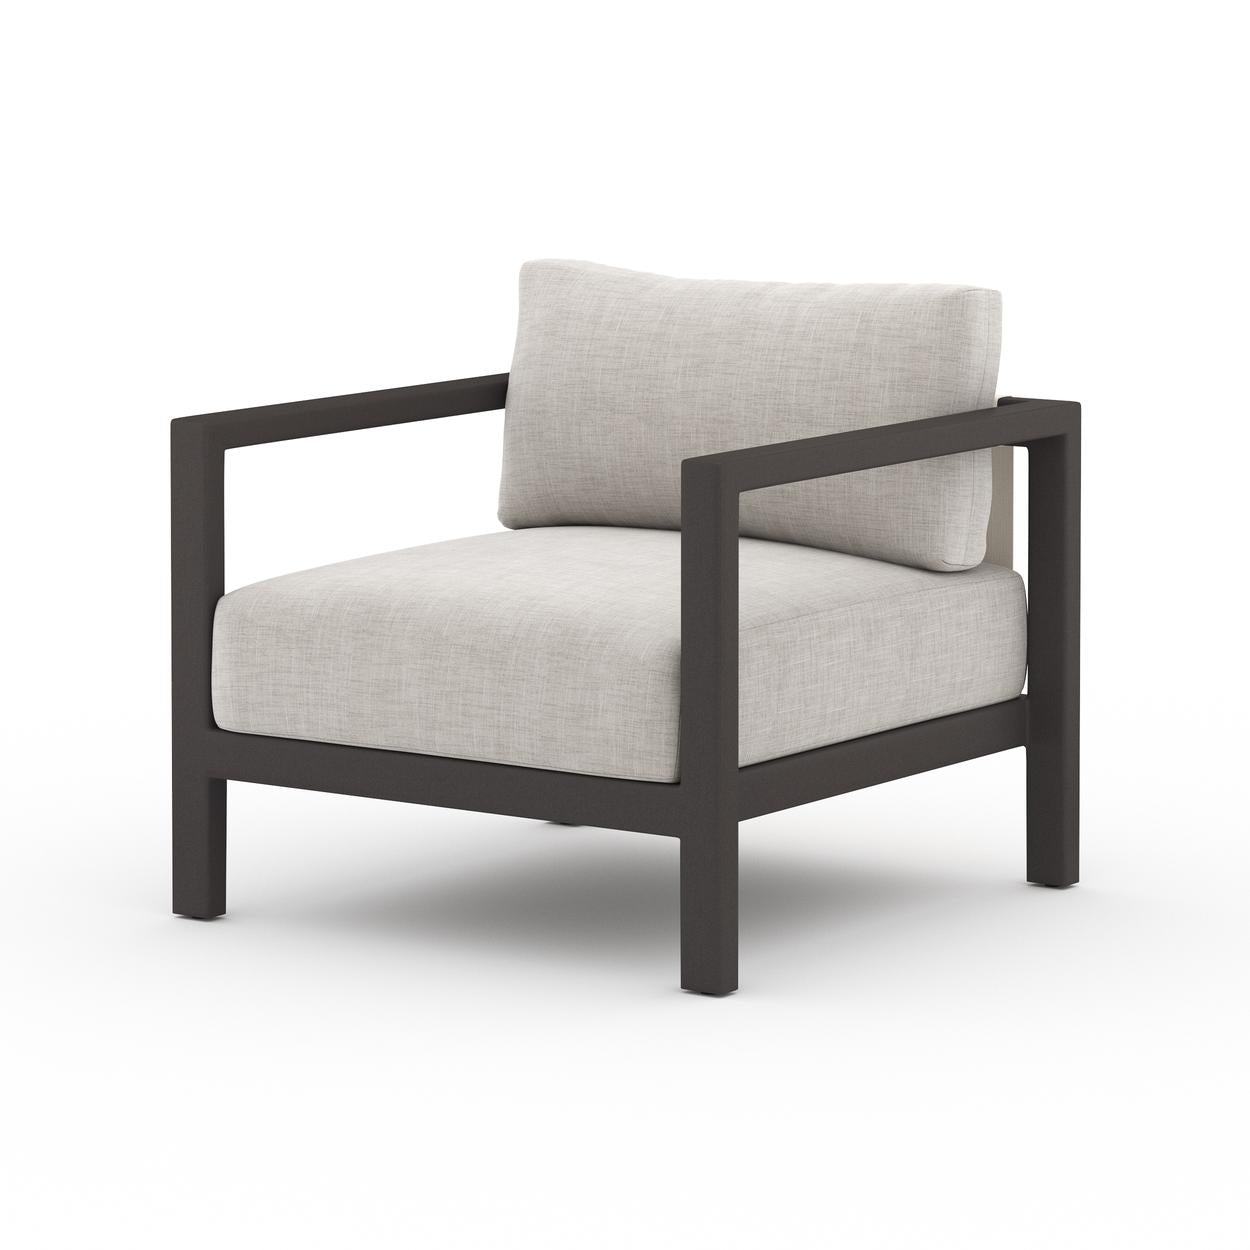 Sonoma Outdoor Chair